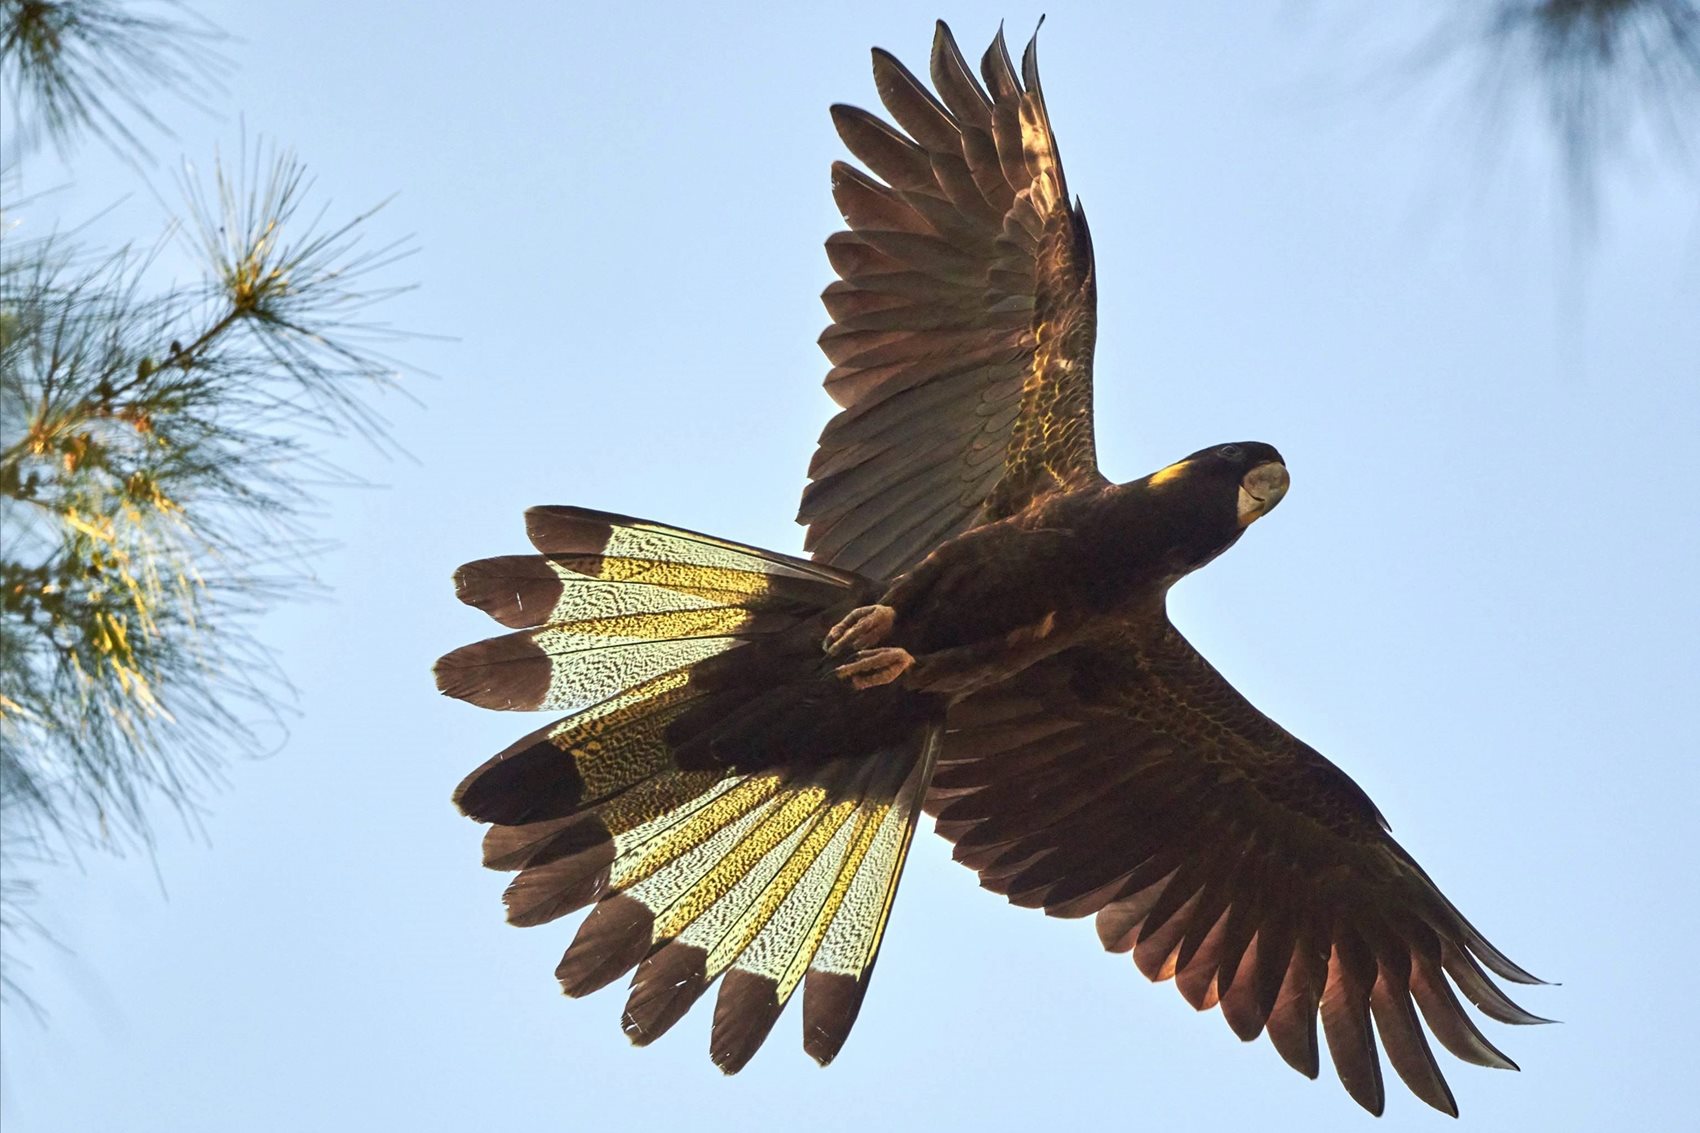 Yellow-tailed black cockatoo in flight